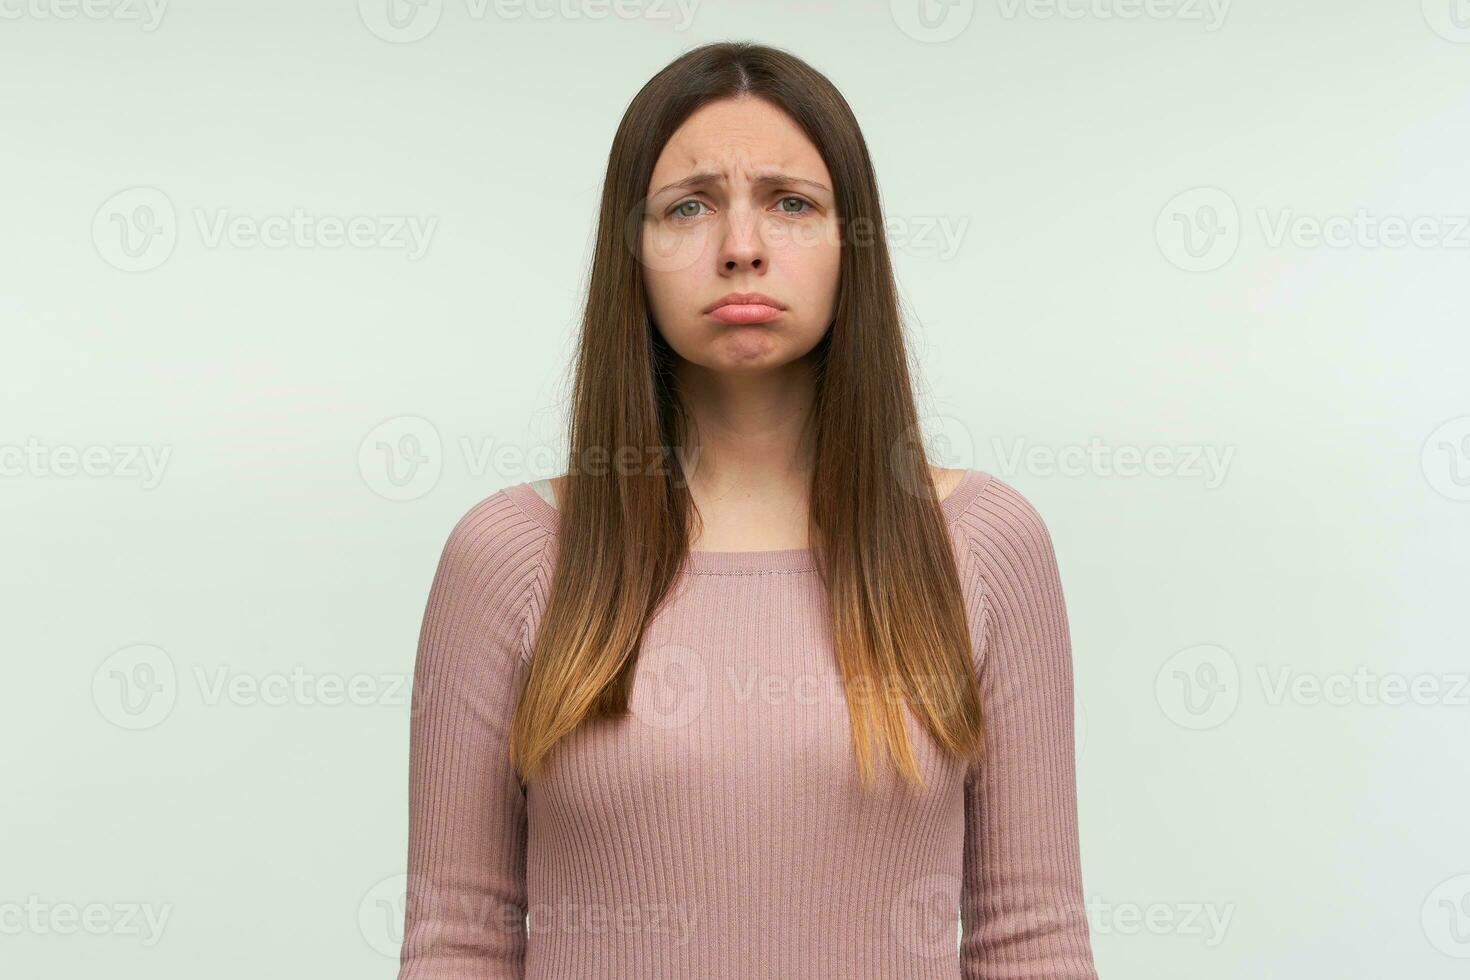 Dissatisfied young female purses lower lip, being abused by something unpleasant, has unhappy expression, dressed in casual pink knit sweater, stands indoor against white wall photo